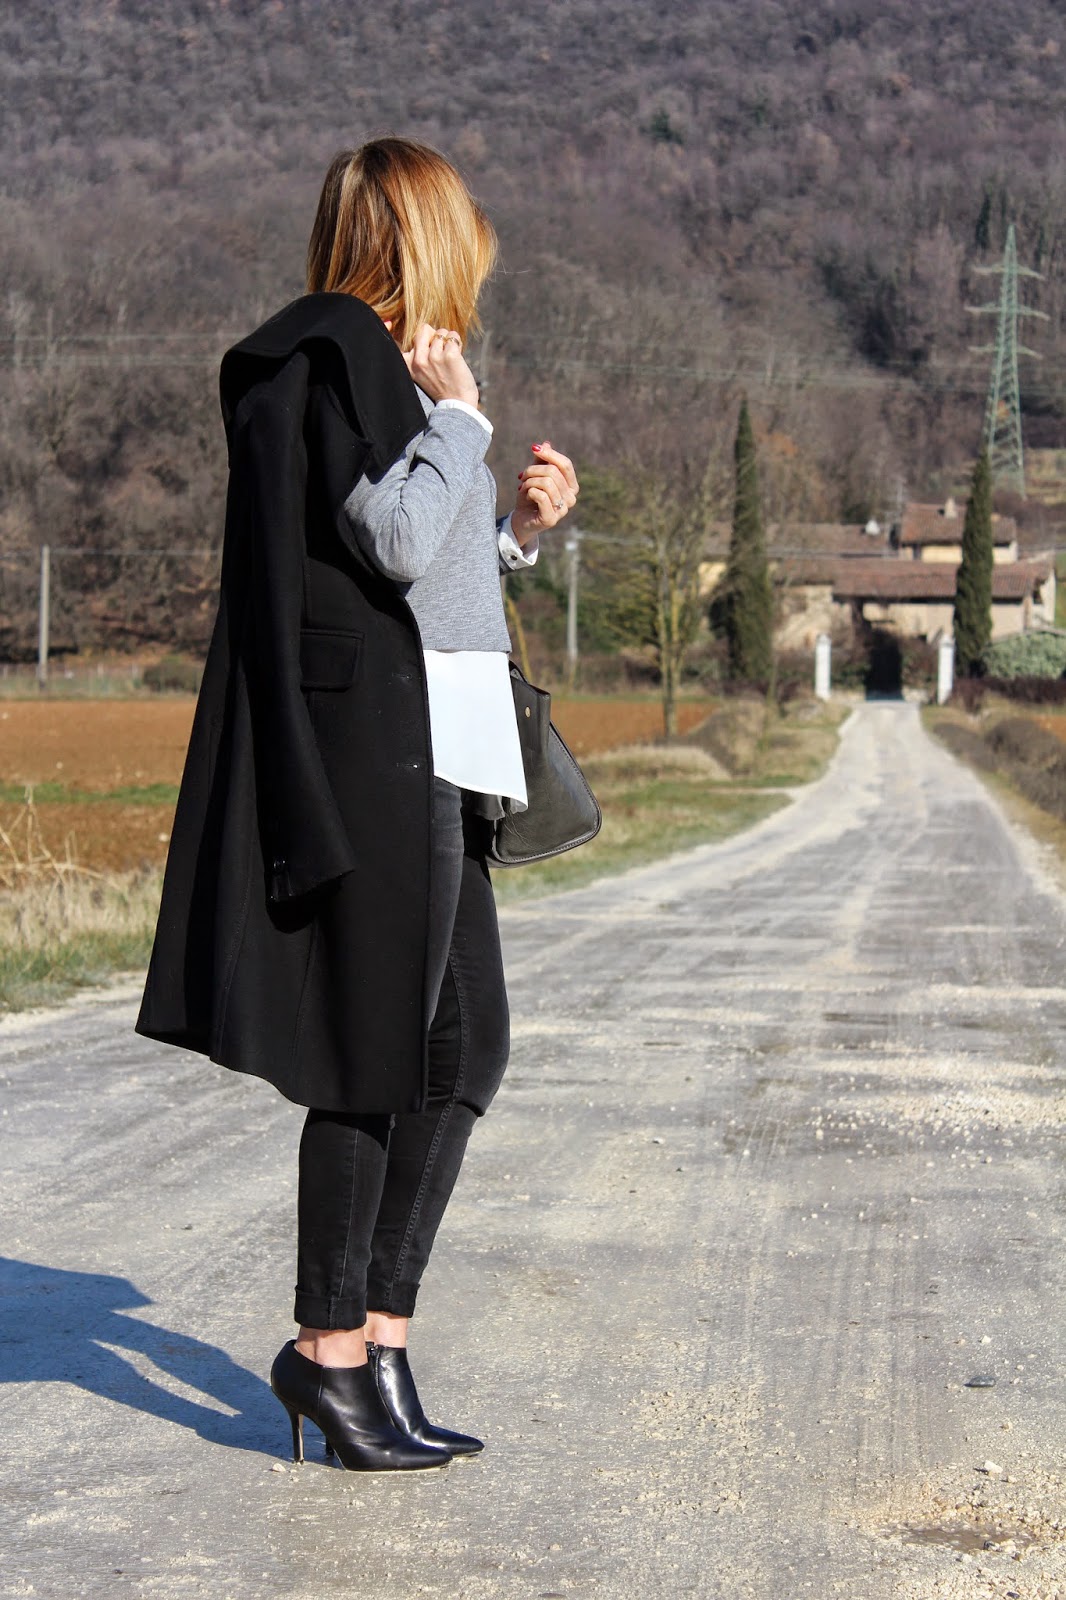 Eniwhere Fashion - Totally casual black outfit and maxi scarf